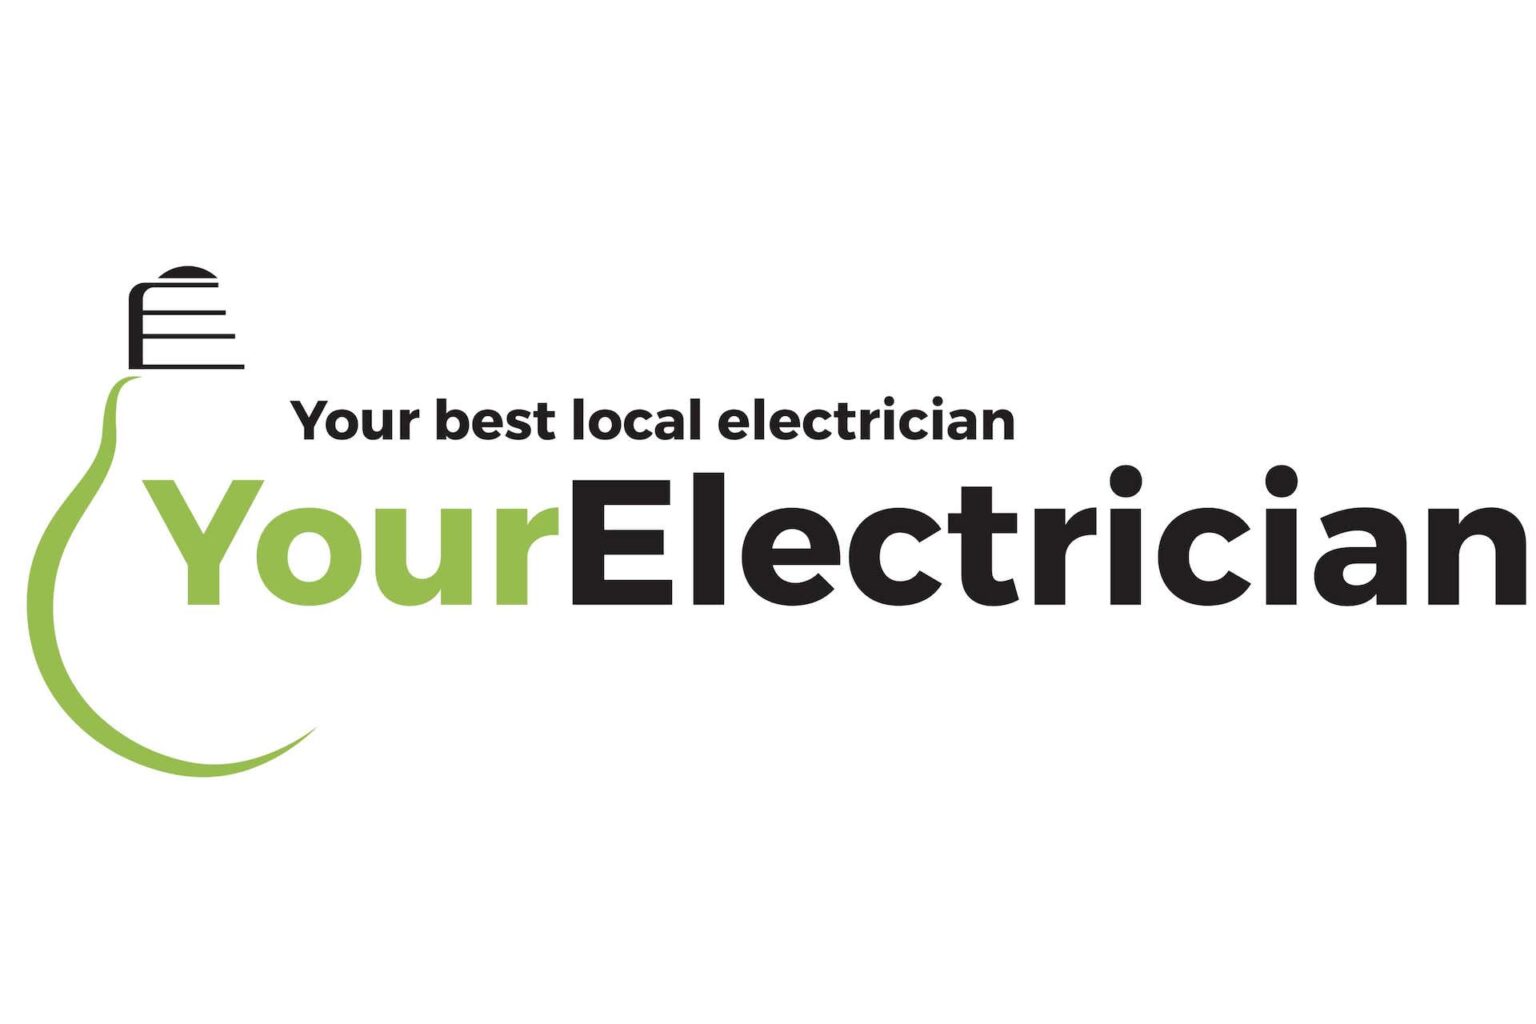 Hiring a local electrician isn't as simple as it sounds, that's why we'll show you a list with some tips and things to consider before doing so.